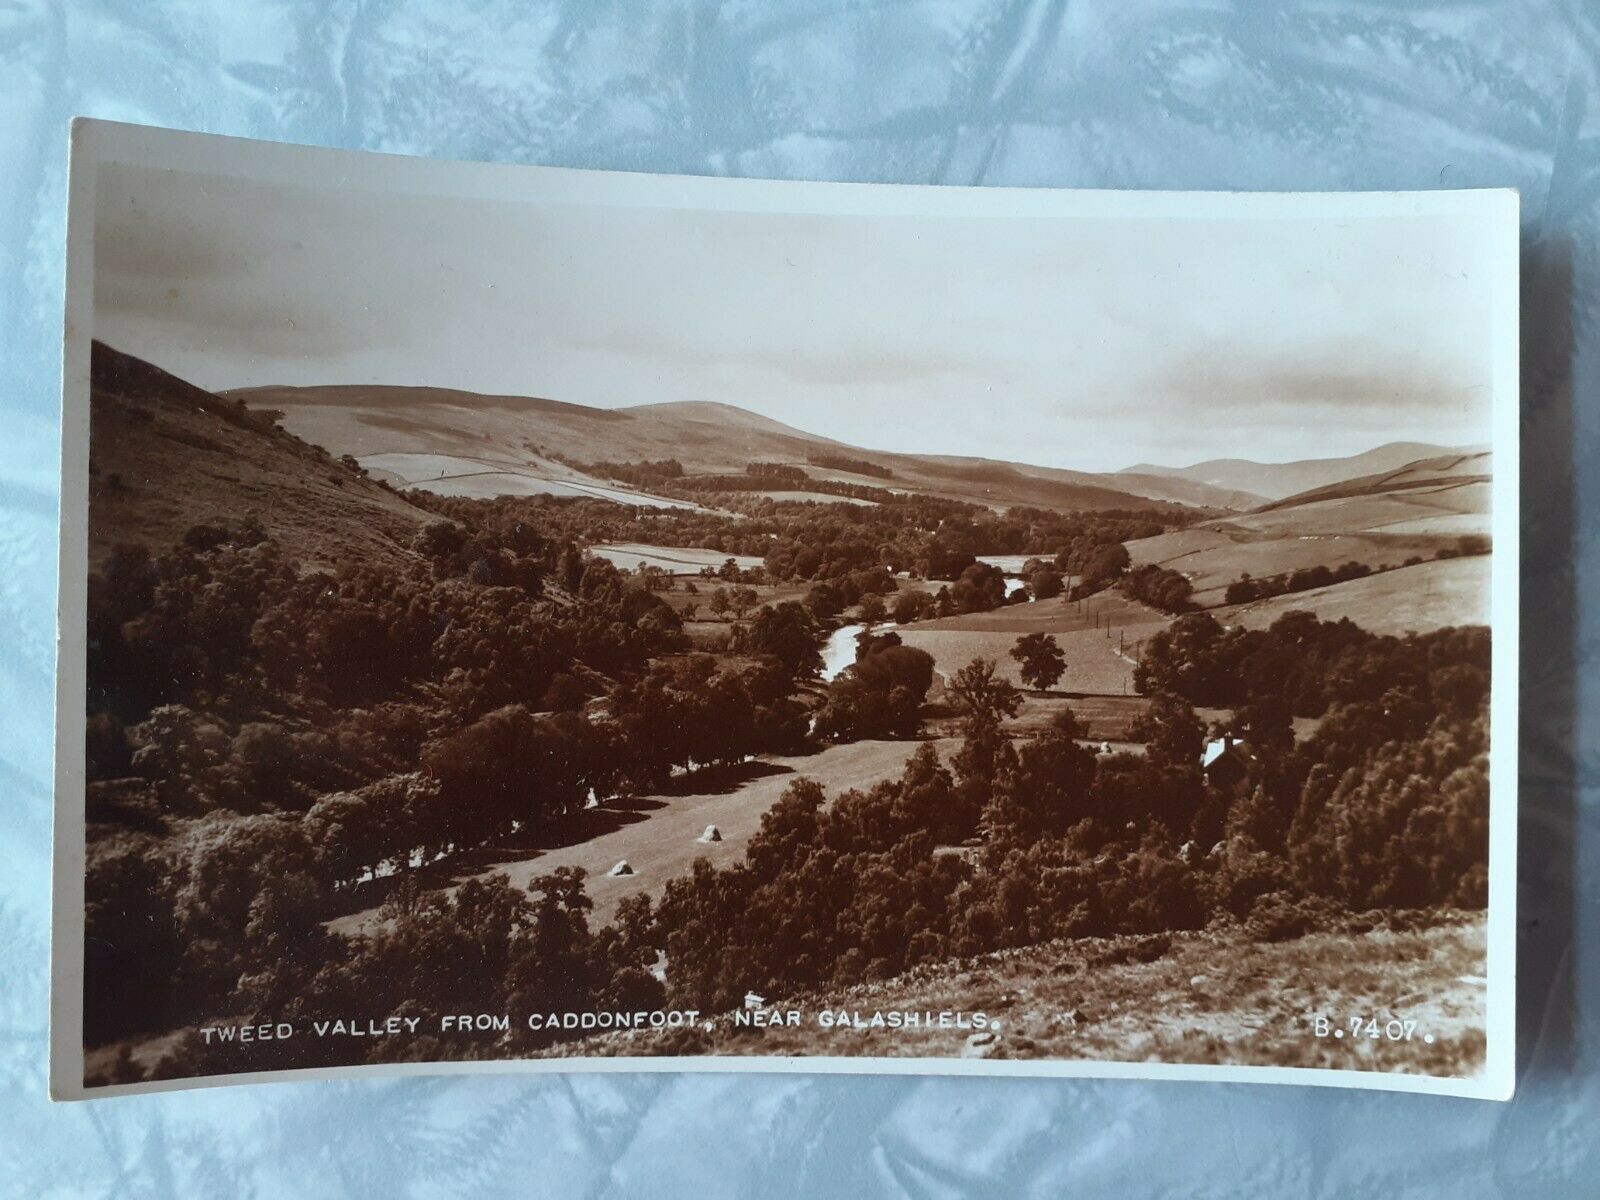 House Clearance - 1930s Vintage Valentine's Service, Tweed Valley from Caddenfoot, nr Galashiels